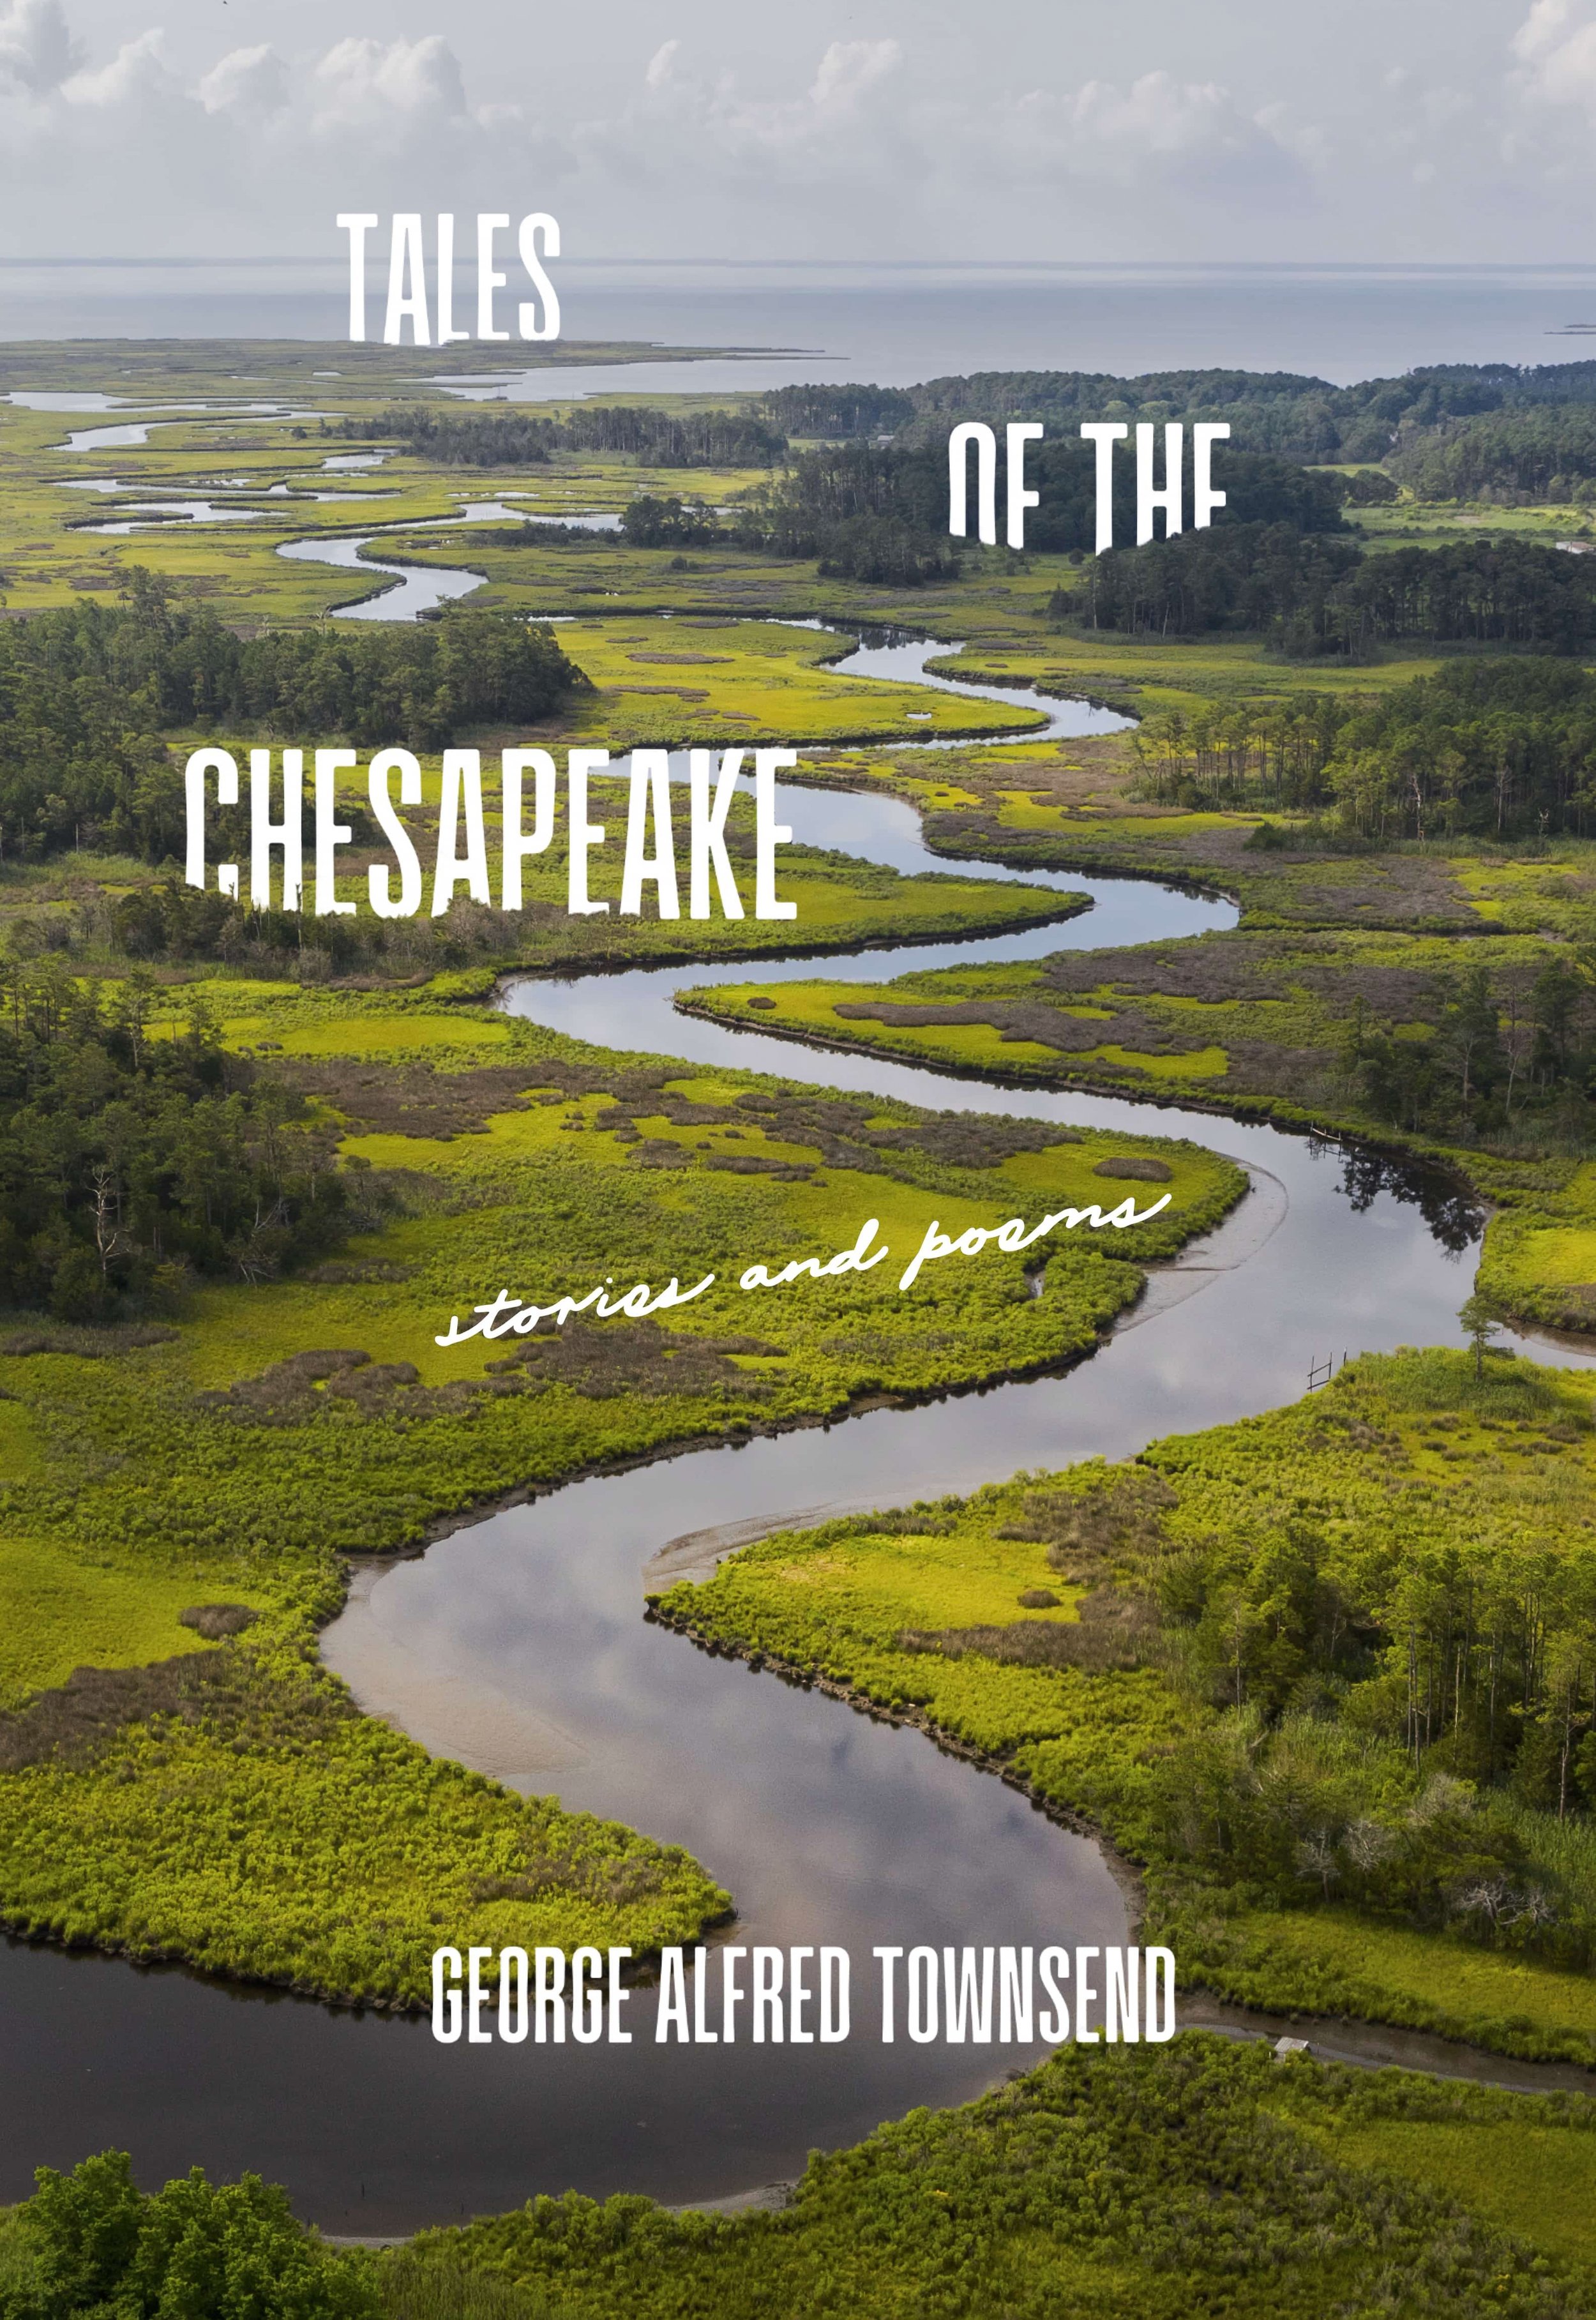 Tales of the Chesapeake cover copy.jpg